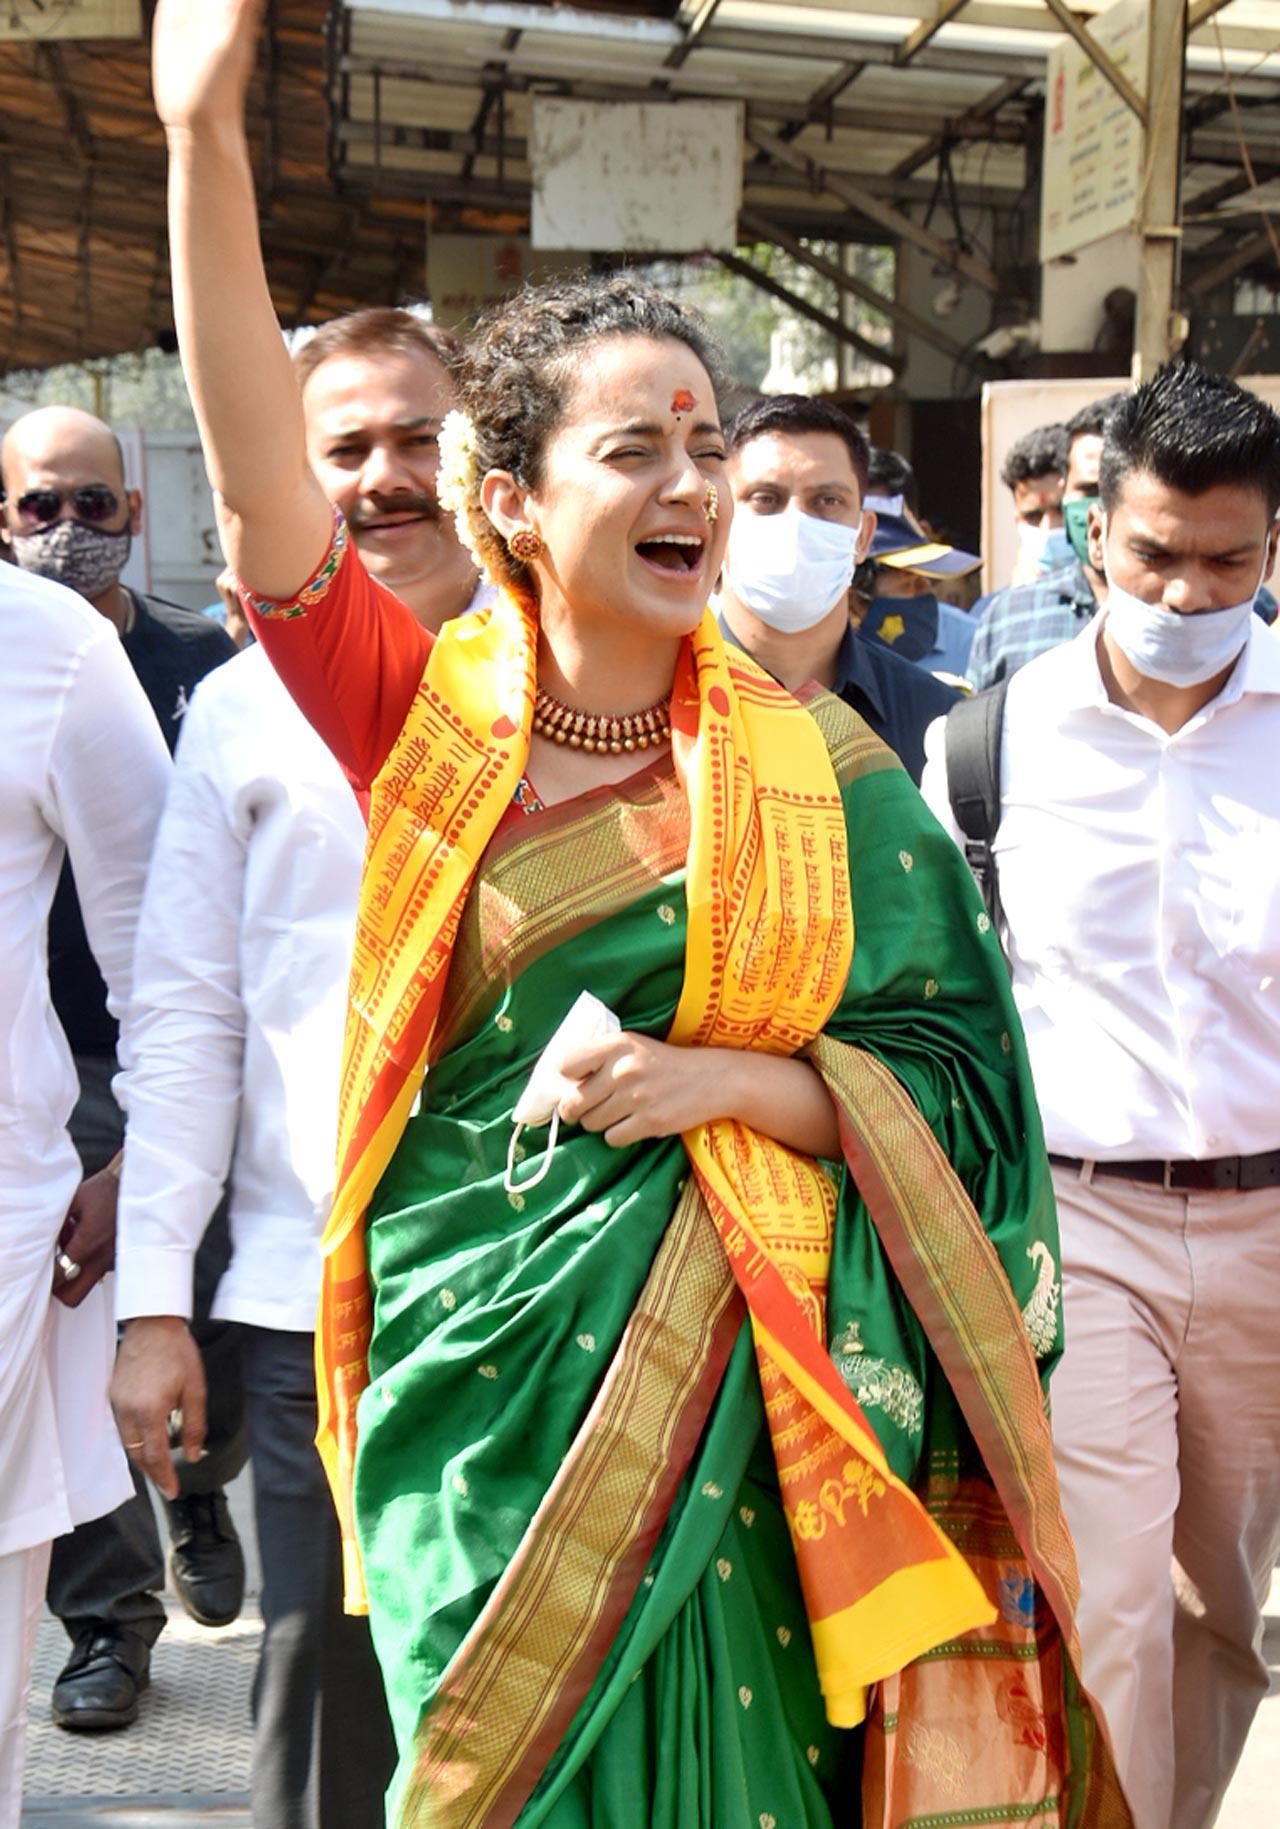 On the work front, Kangana Ranaut is slated to begin shooting for Razneesh Ghai's Dhaakad. She had been prepping for the action thriller in Manali. Earlier, Kangy was shooting for Thalaivi in Hyderabad and Chennai. Thalaivi is an upcoming bilingual biopic of late Jayalalithaa. The film will trace the journey of the late leader from silver screen to politics. It is directed by AL Vijay and also stars Arvind Swami, Prakash Raj, Madhoo and Bhagyashree.